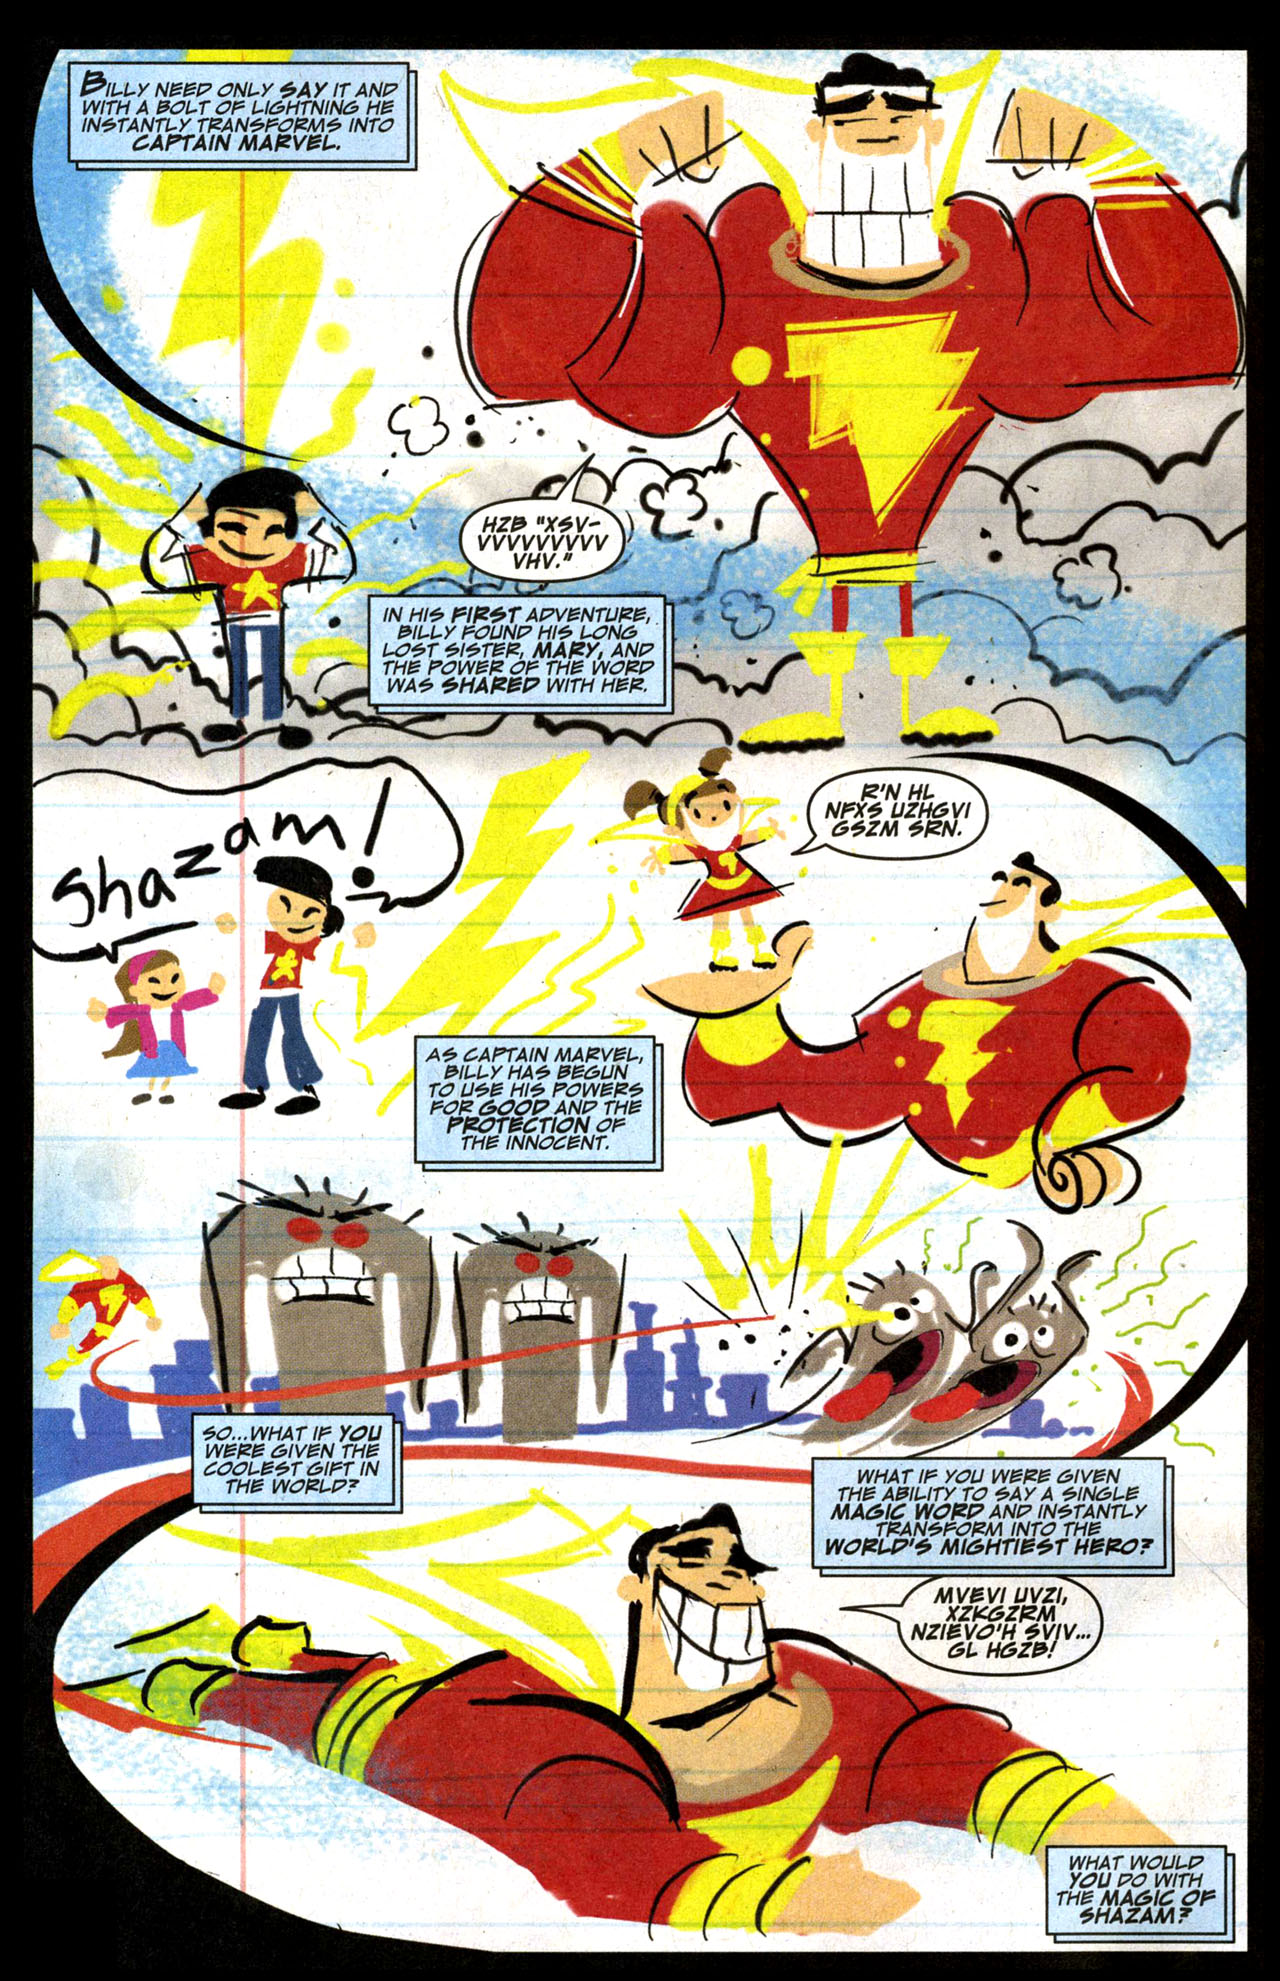 Read online Billy Batson & The Magic of Shazam! comic -  Issue #1 - 6